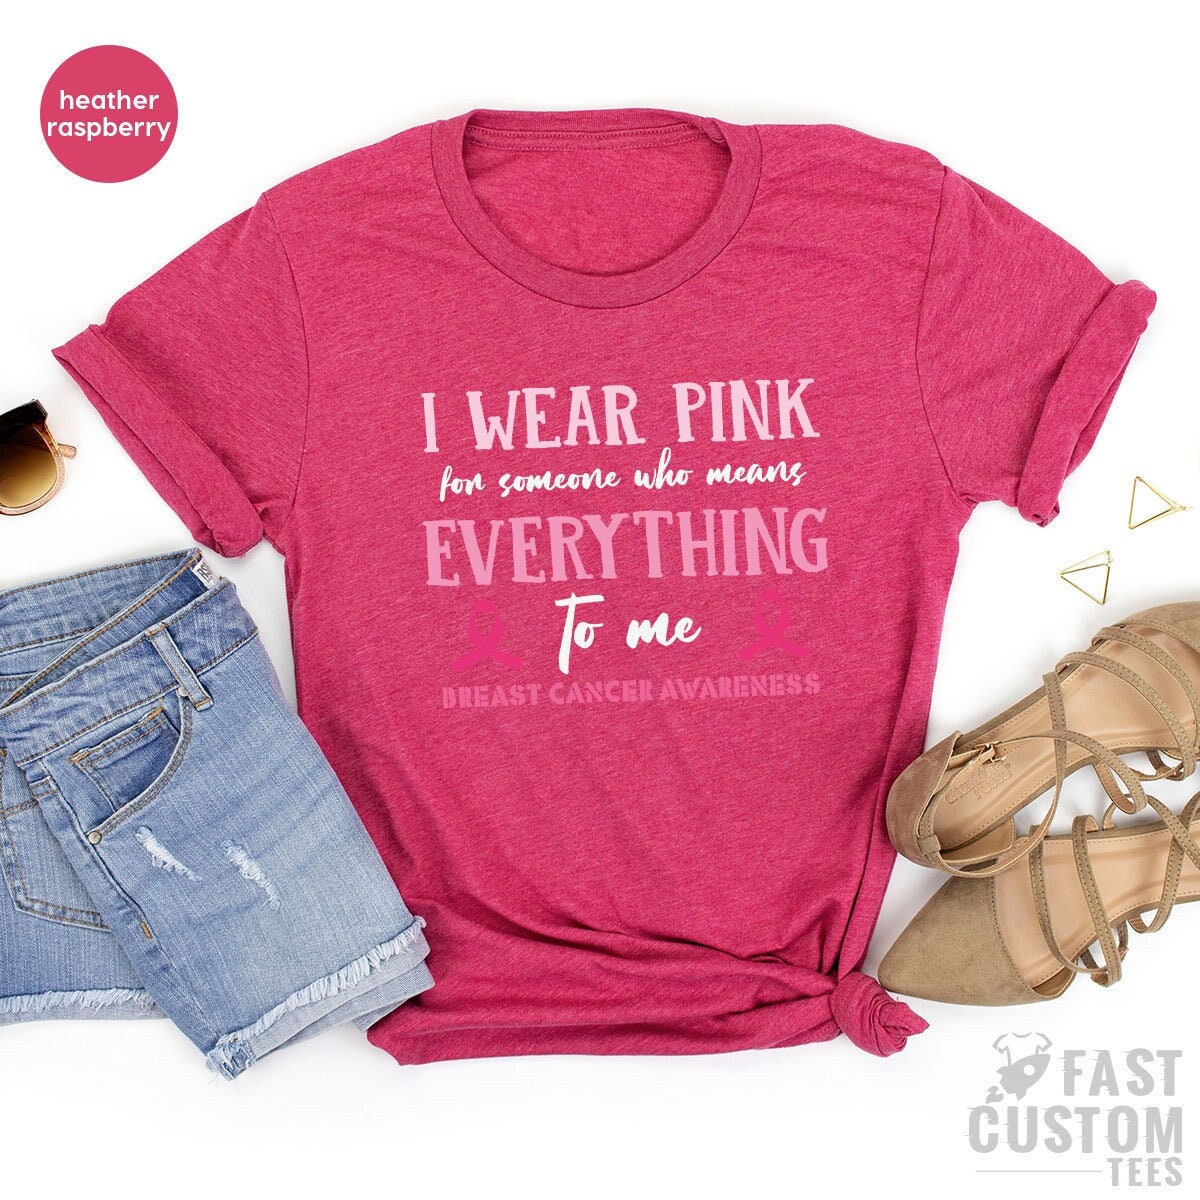 Breast Cancer Awareness Shirts - Creative Housewives